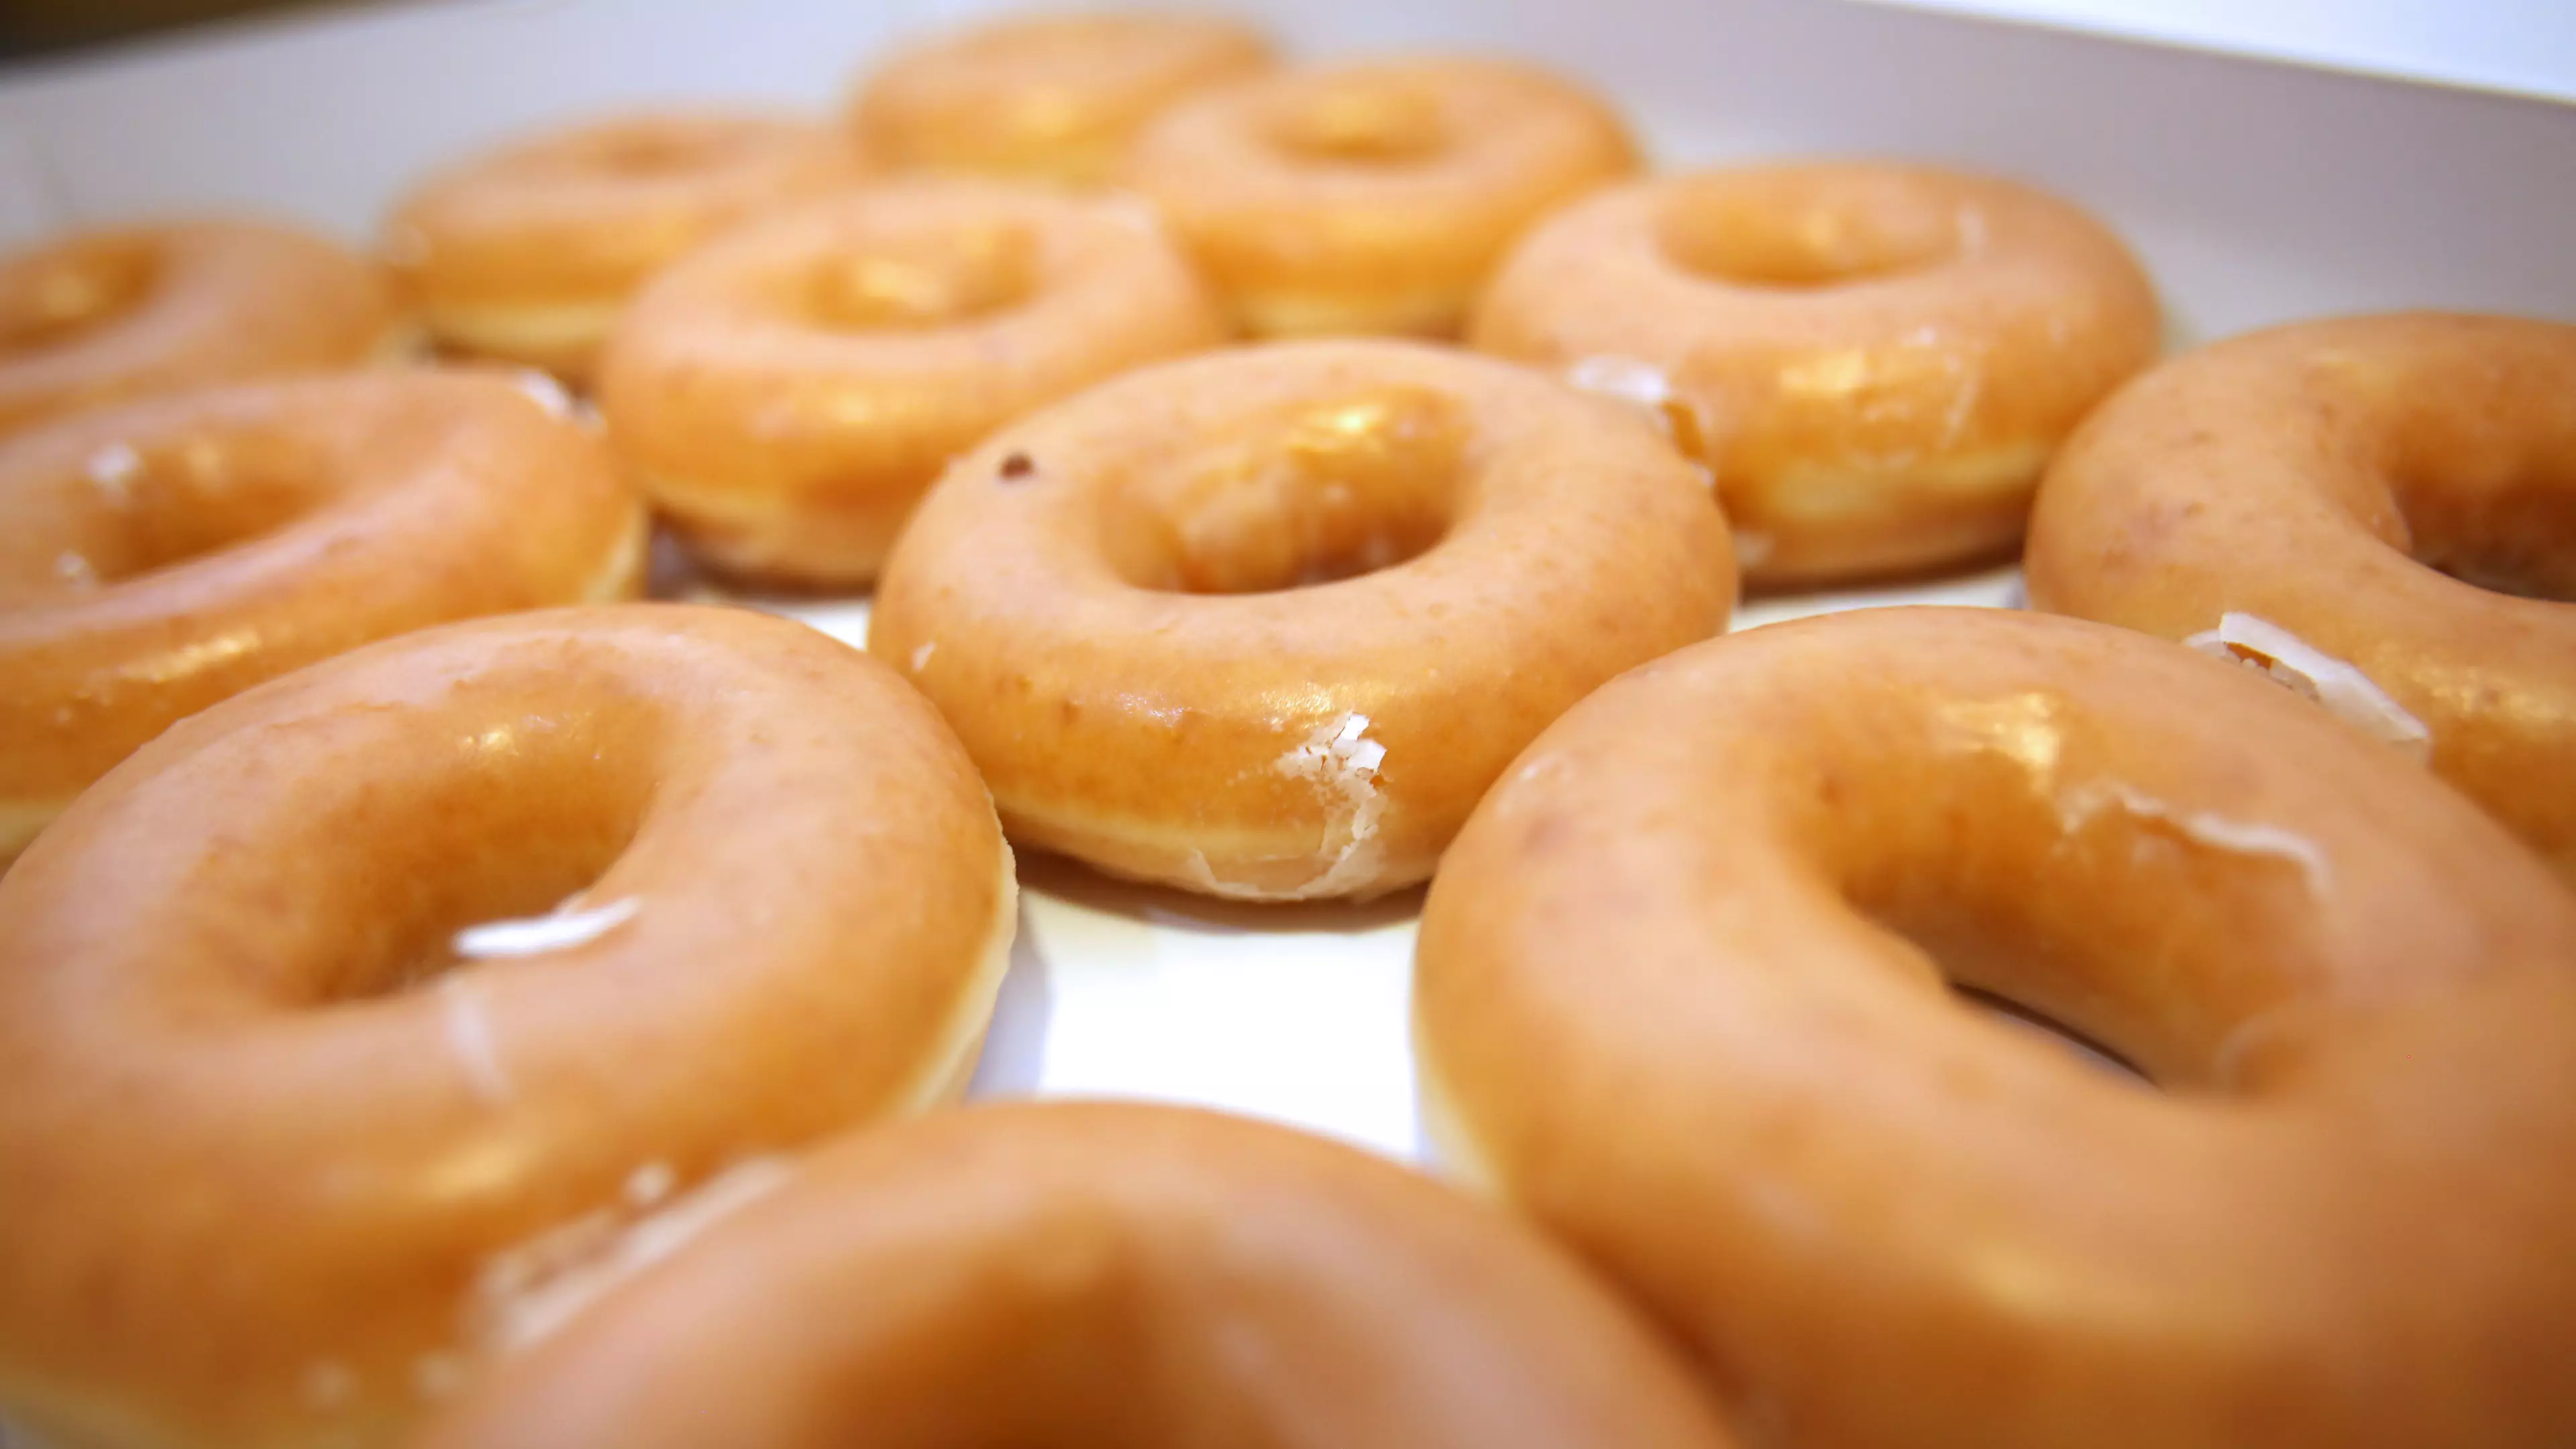 ​There's A Five-Mile Krispy Kreme Race Where You Have To Eat 12 Doughnuts